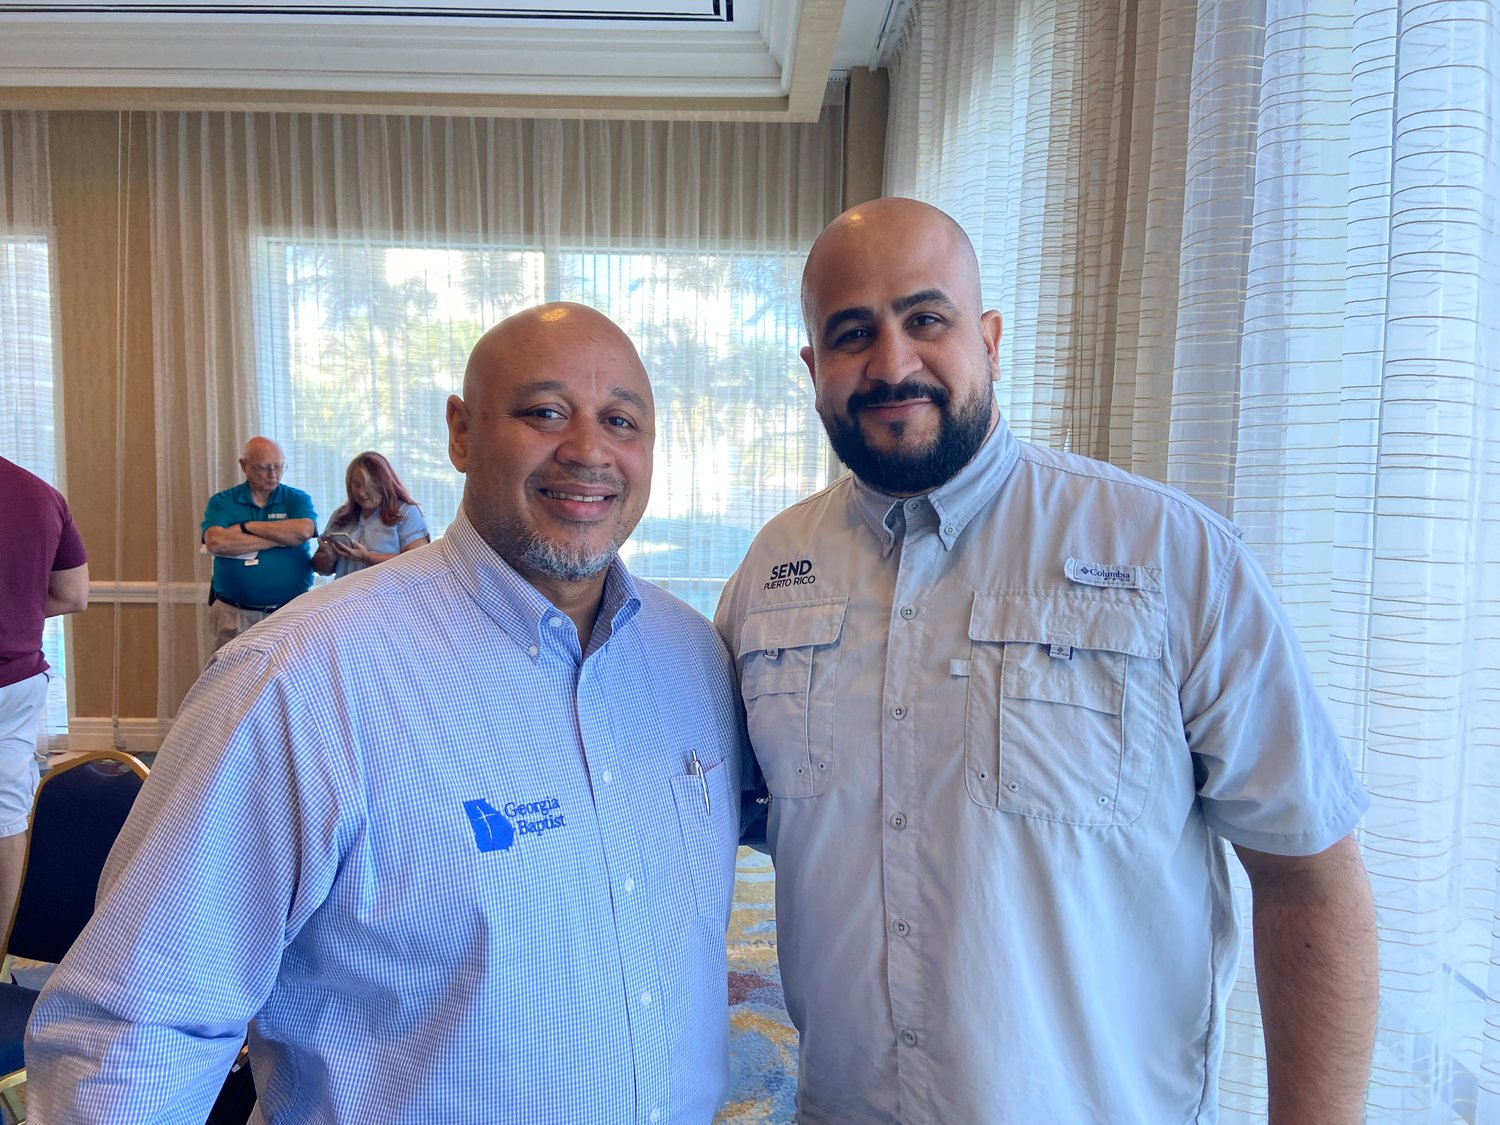 Samuel Ayala, left, poses with Felix Cabrera, executive director of the Puerto Rico Baptist Convention during a vision trip last month.